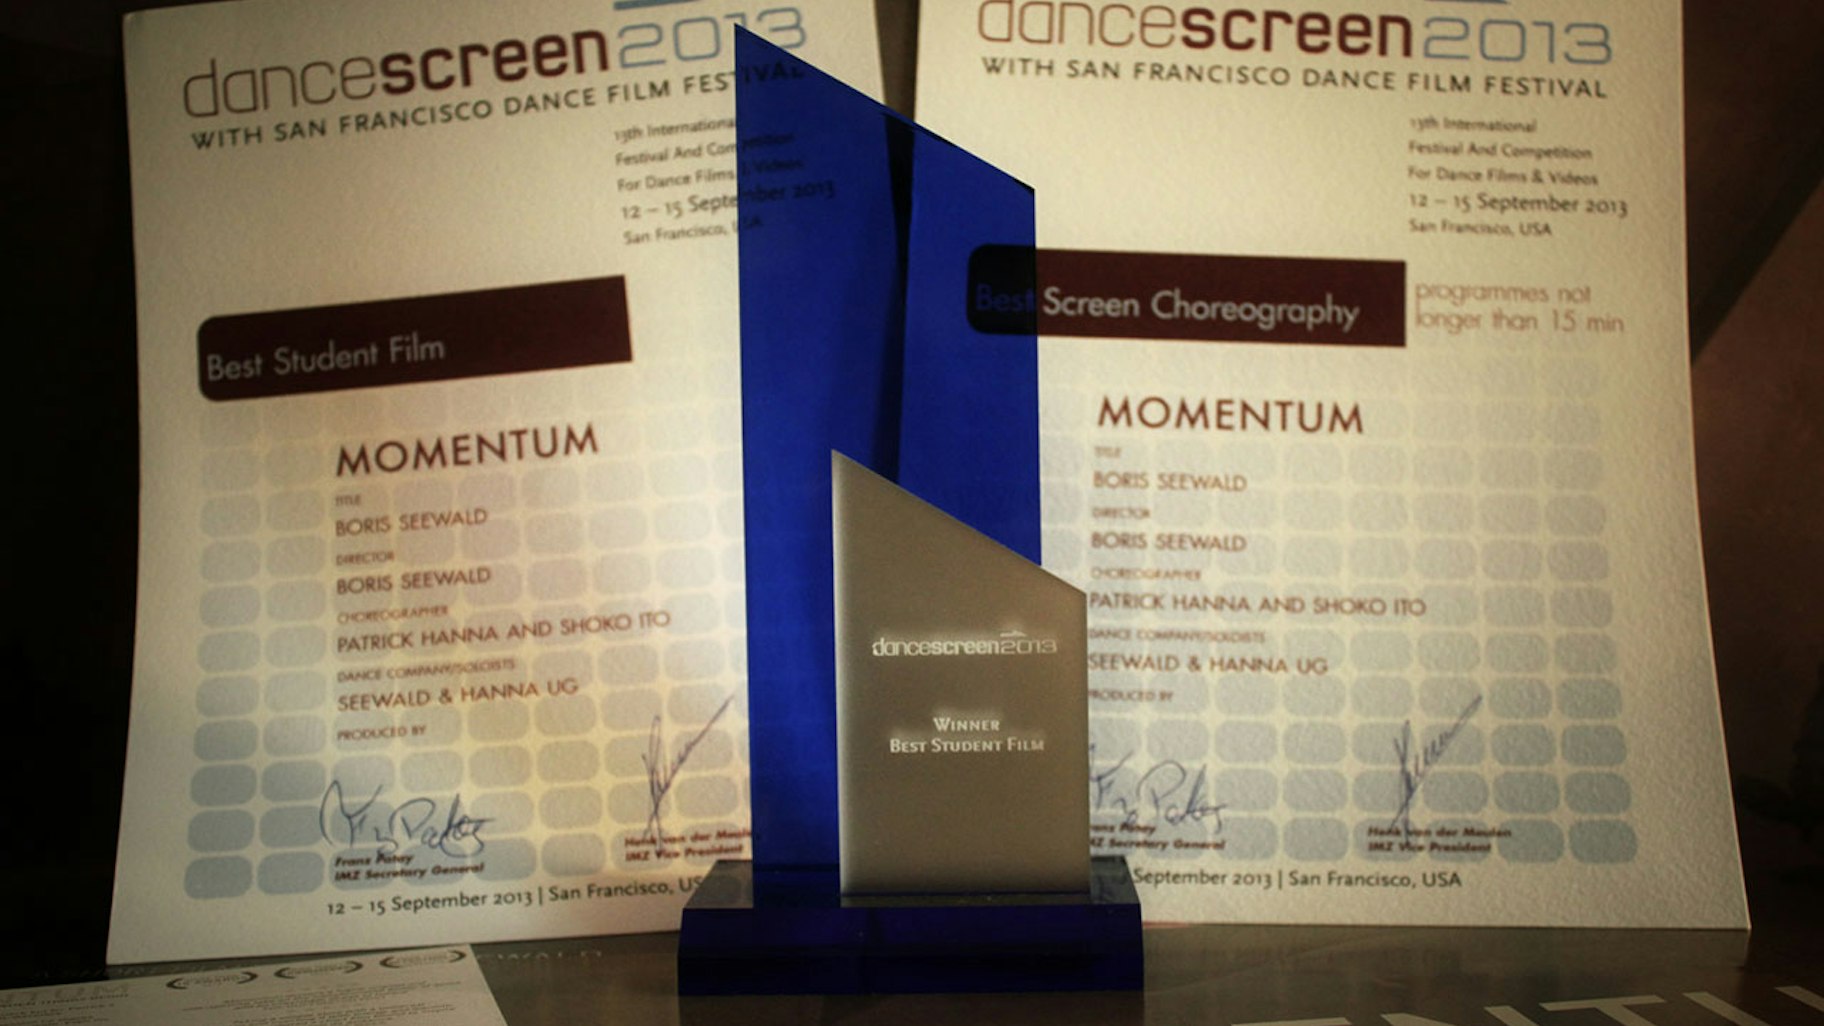 Momentum - Two Awards at the San Francisco Dance Film Festival